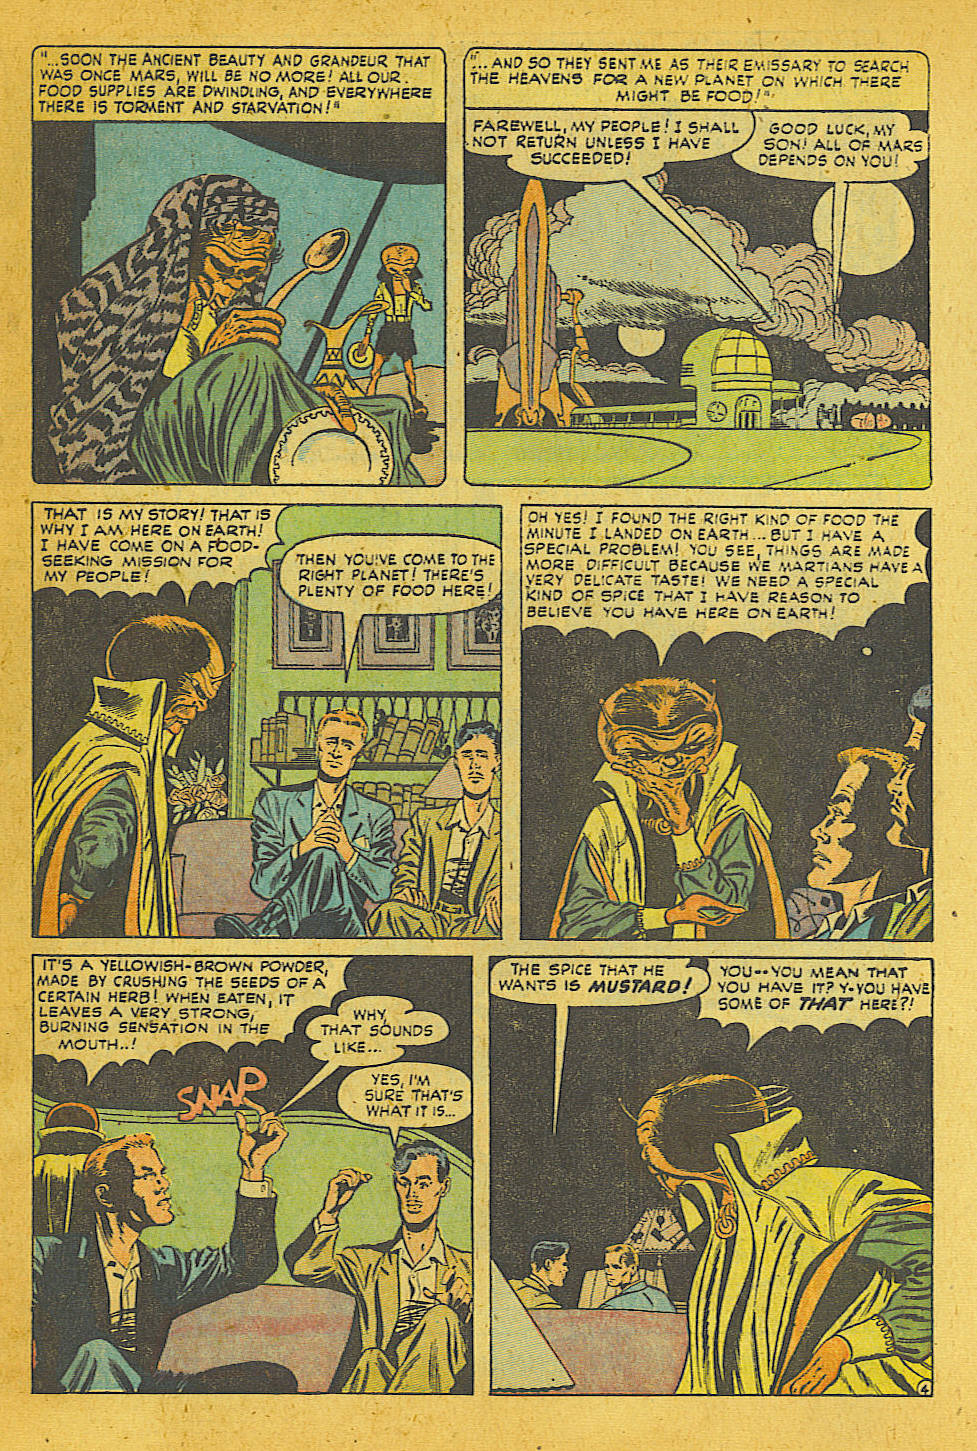 Marvel Tales (1949) 111 Page 10